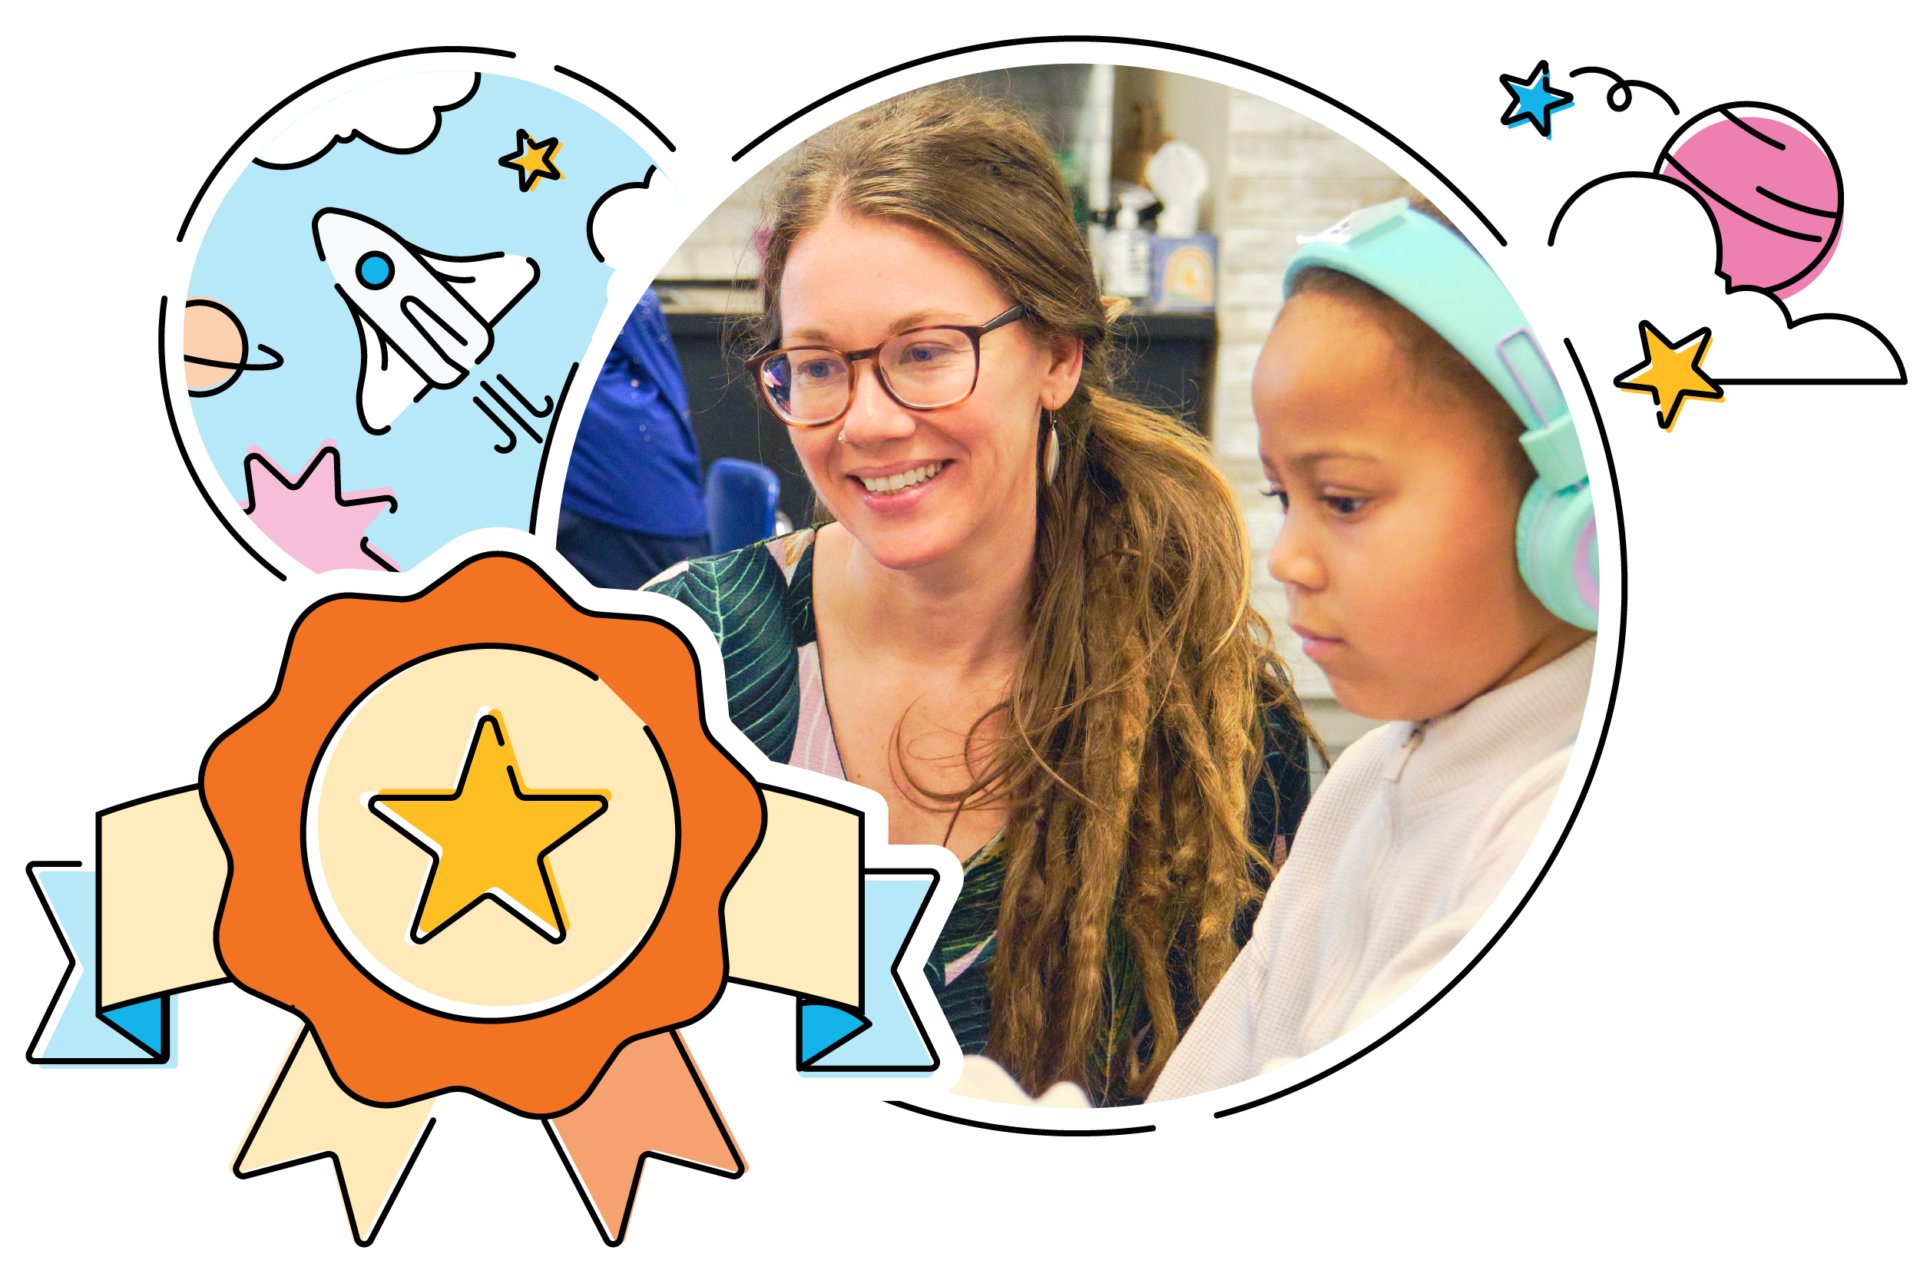 A woman and a young girl wearing headphones use a computer, surrounded by colorful doodles of a rocket, stars, and a planet while exploring the science of teaching reading.